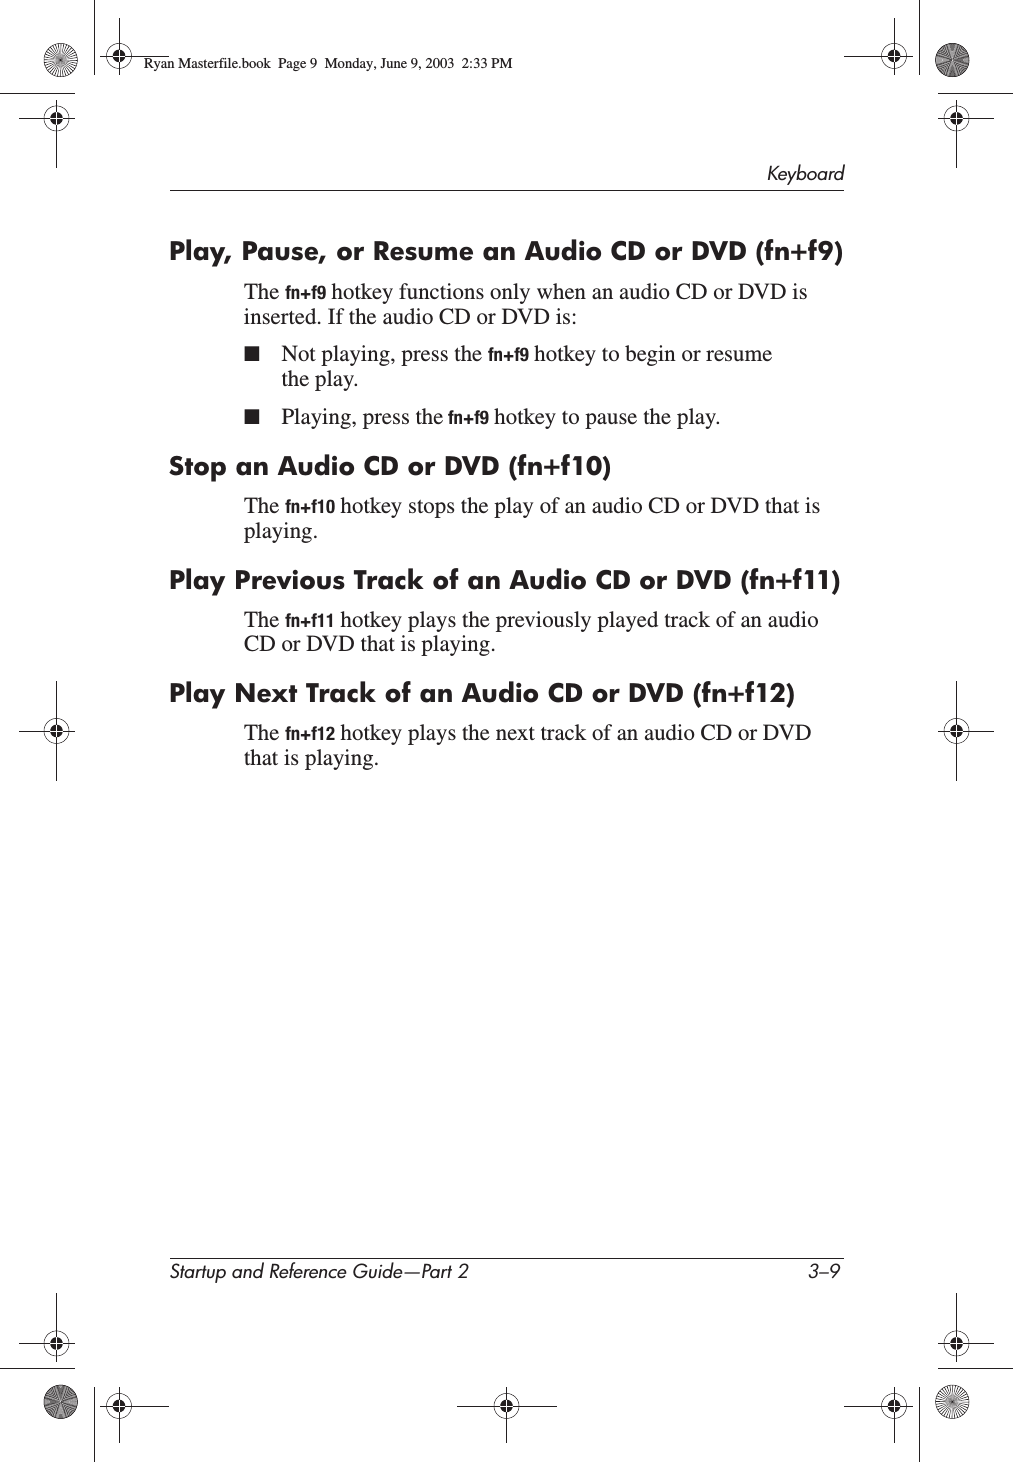 KeyboardStartup and Reference Guide—Part 2 3–9Play, Pause, or Resume an Audio CD or DVD (fn+f9)The fn+f9 hotkey functions only when an audio CD or DVD is inserted. If the audio CD or DVD is:■Not playing, press the fn+f9 hotkey to begin or resume the play.■Playing, press the fn+f9 hotkey to pause the play.Stop an Audio CD or DVD (fn+f10)The fn+f10 hotkey stops the play of an audio CD or DVD that is playing.Play Previous Track of an Audio CD or DVD (fn+f11)The fn+f11 hotkey plays the previously played track of an audio CD or DVD that is playing.Play Next Track of an Audio CD or DVD (fn+f12)The fn+f12 hotkey plays the next track of an audio CD or DVD that is playing.Ryan Masterfile.book  Page 9  Monday, June 9, 2003  2:33 PM